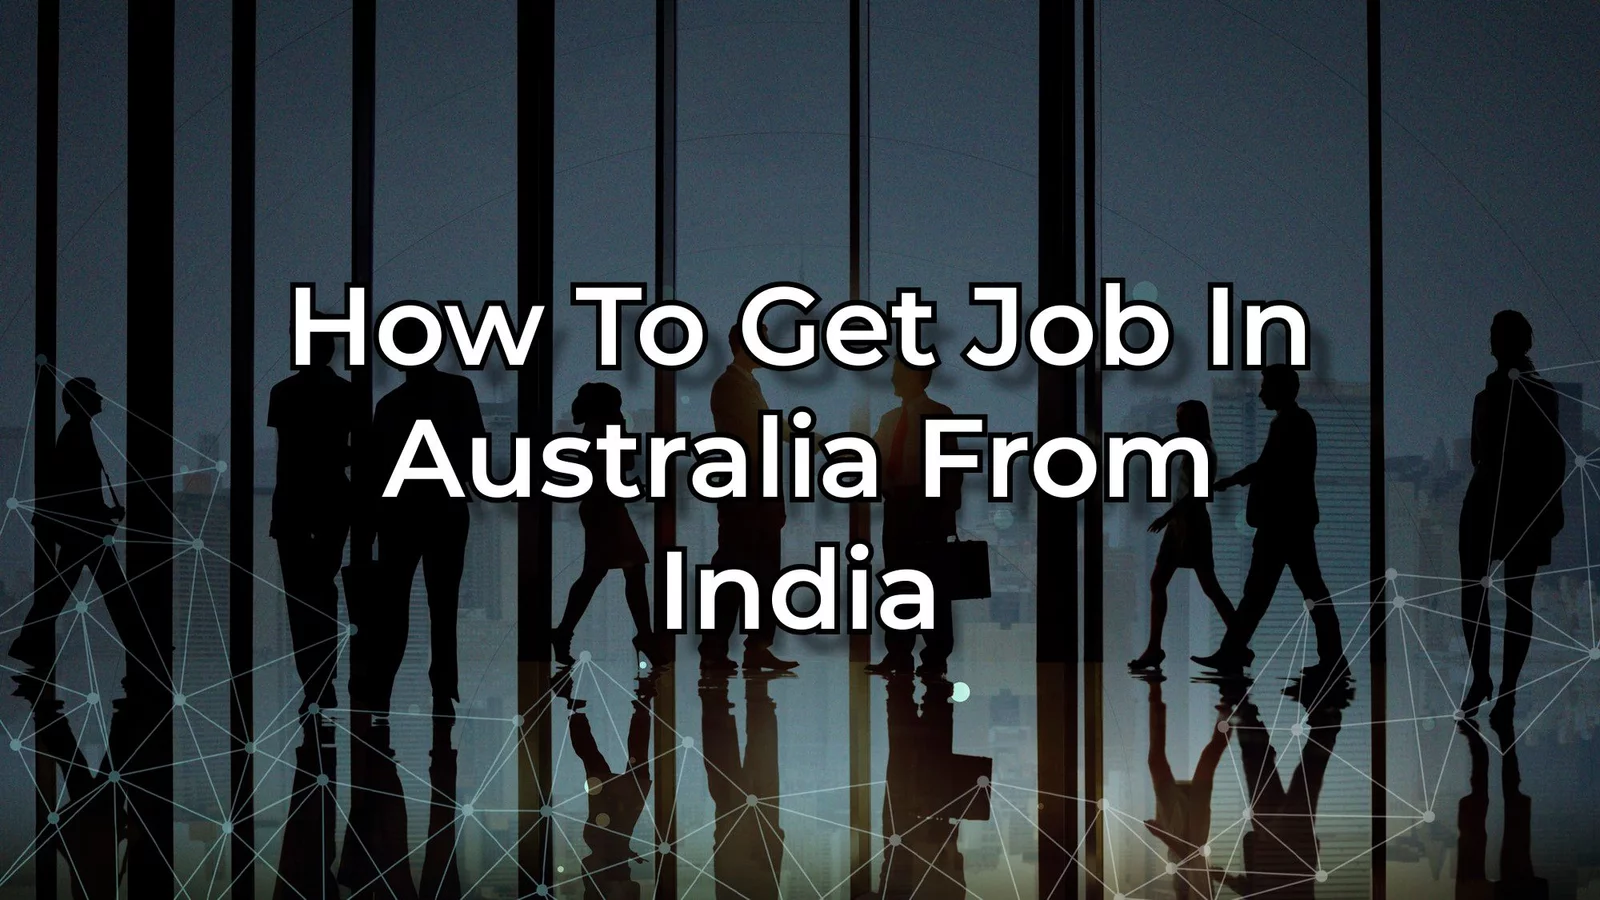 How To Get Job In Australia From India